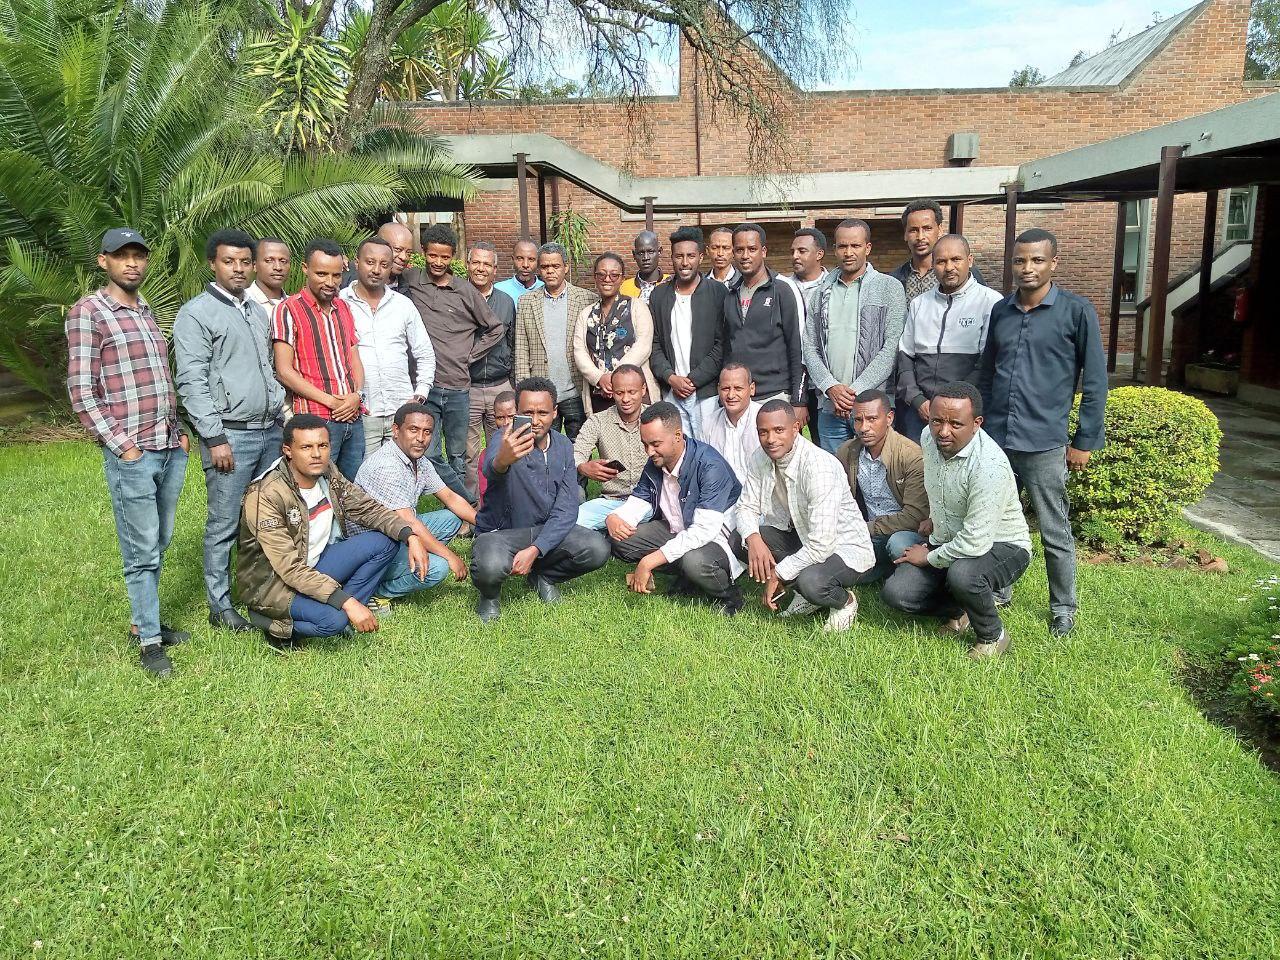 Local experts at training on remote sensing based forest monitoring tools in Ethiopia